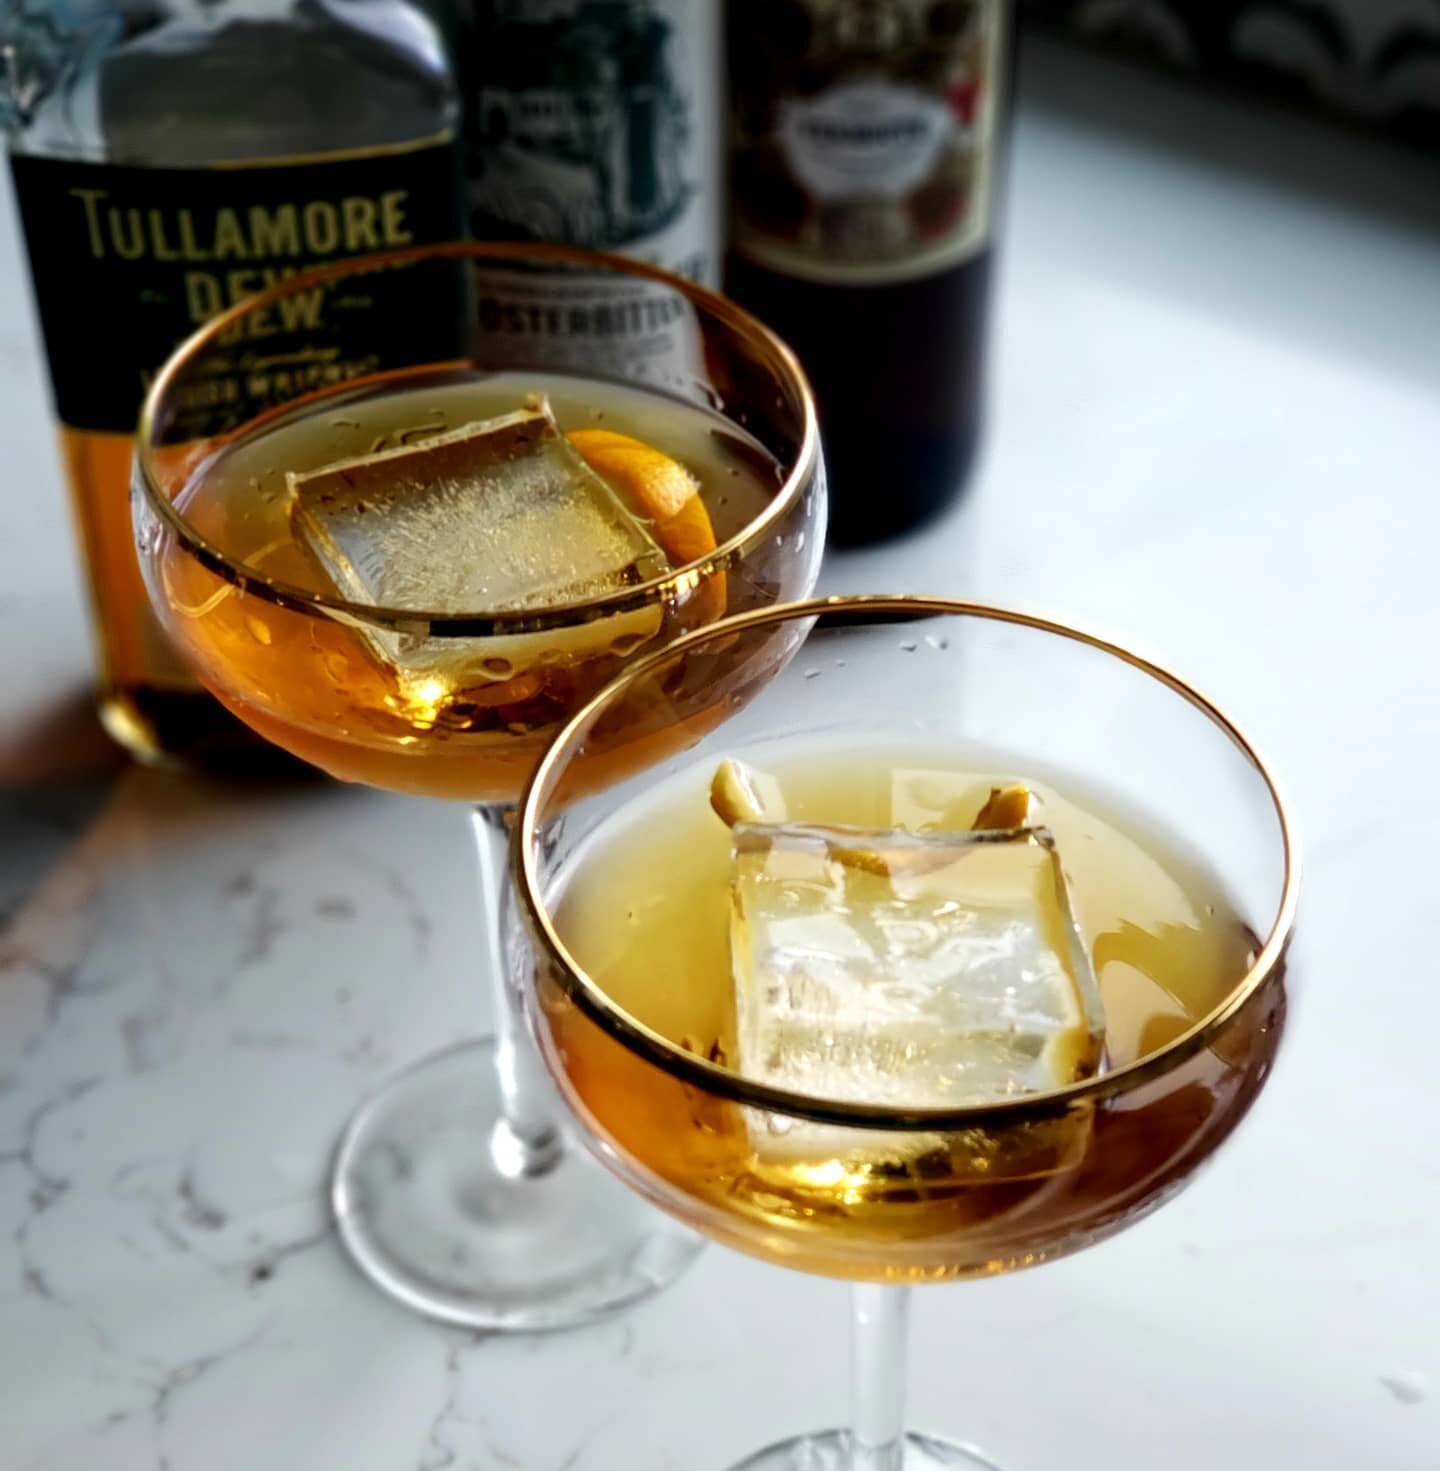 🍀 Tipperary cocktail 🍀

A classic Irish cocktail served straight up with Tullamore Dew Irish whiskey, Chartreuse, sweet vermouth and bitters. Muddle over ice and strain. 🥃

Available as an add on with our Irish Afternoon kits! 🍀